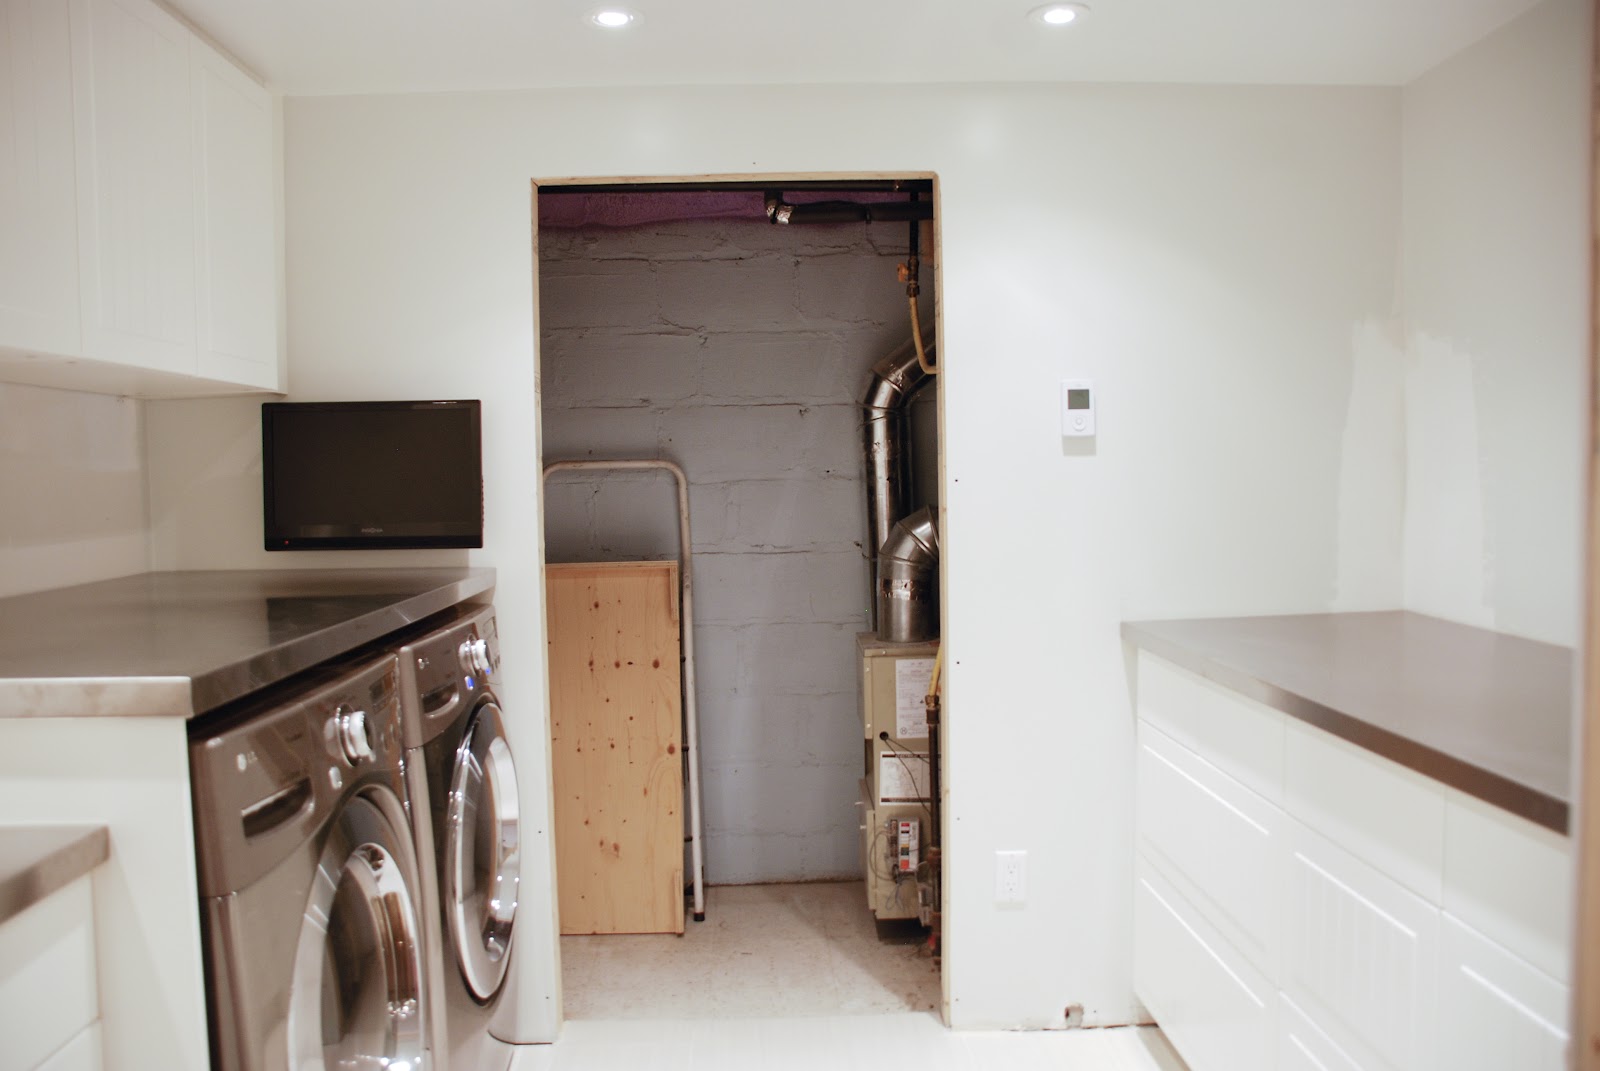 How to Build a Laundry Room Countertop - House On Longwood Lane